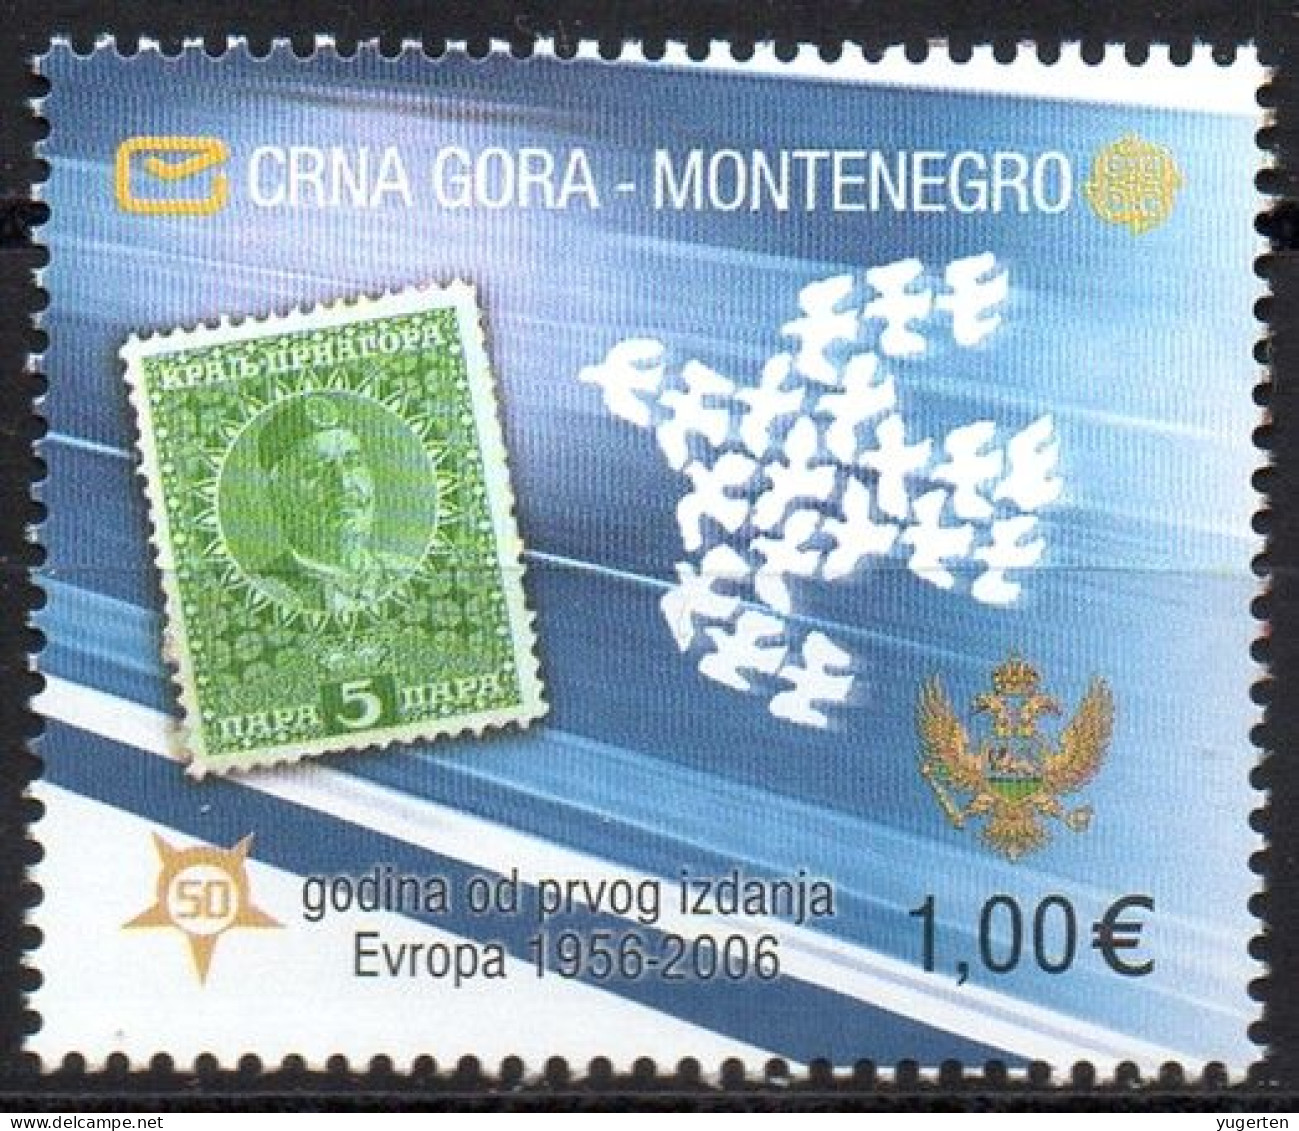 MONTENEGRO 2006 - 1v - MNH - Europa 50 Years Anniv.- Colombe - Pigeon - Peace - Paix - Dove - Stamps On Stamps Taube - Duiven En Duifachtigen